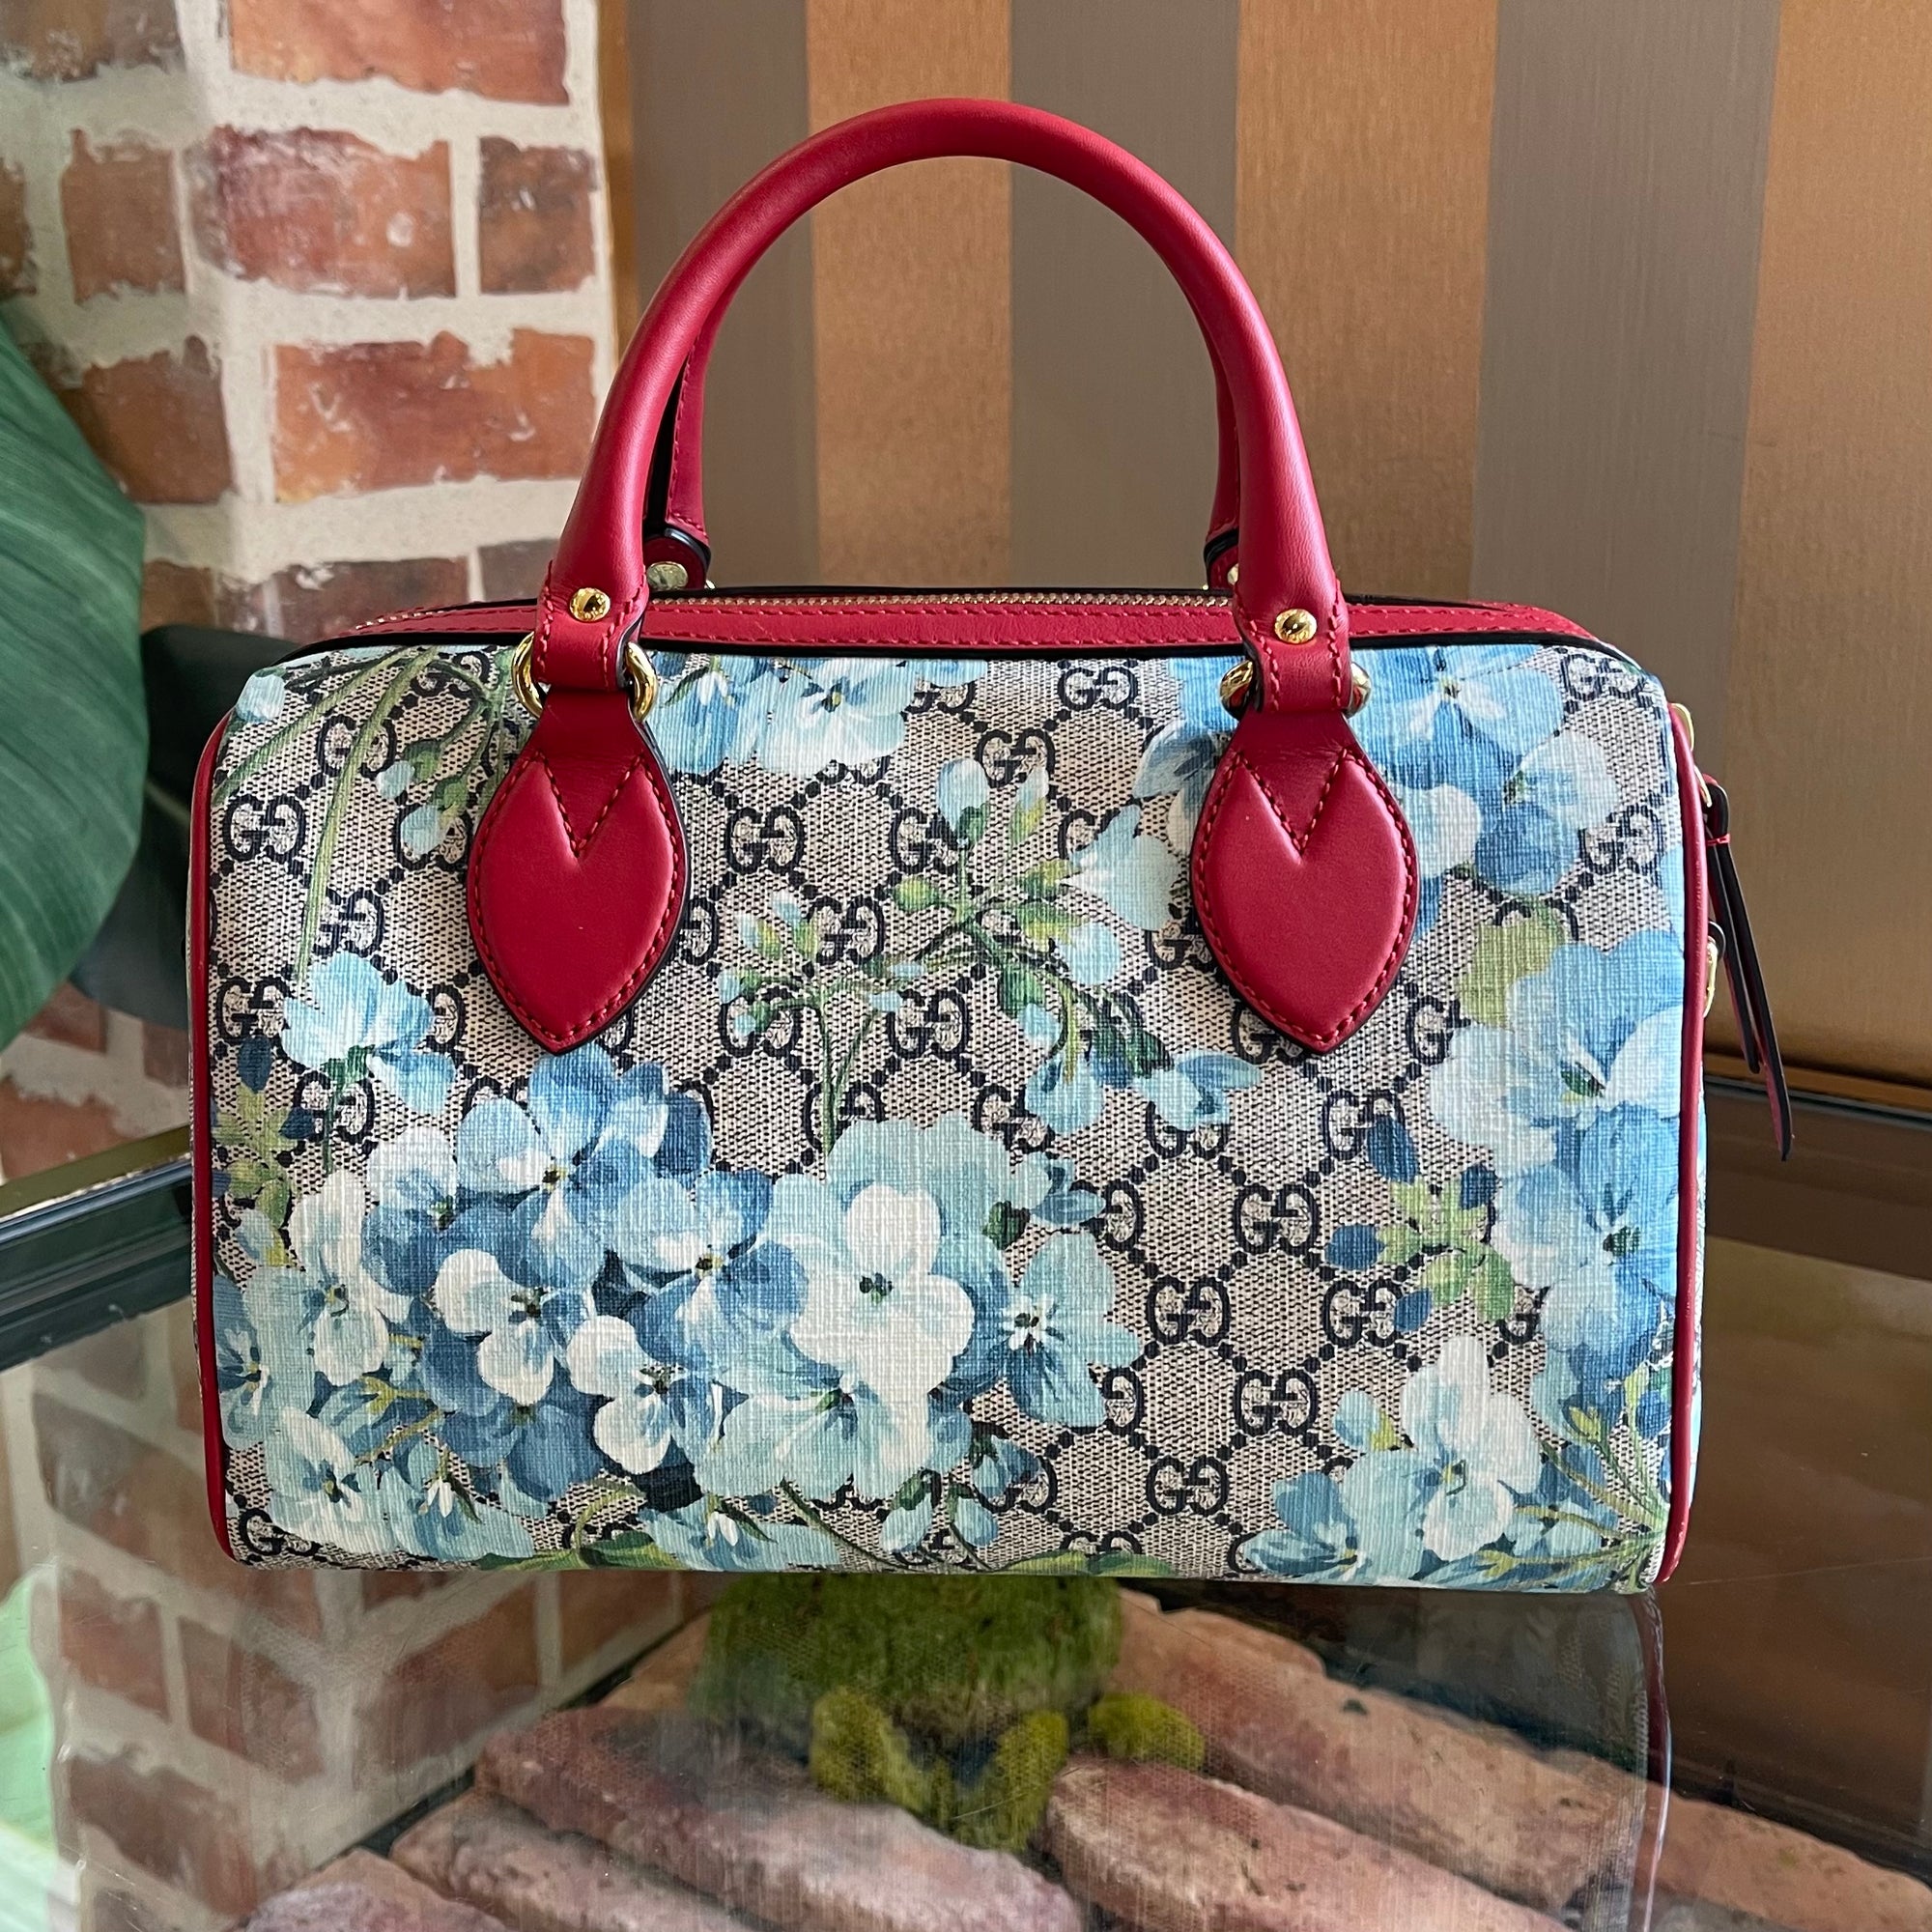 GUCCI Coated Canvas Blooms Boston Satchel